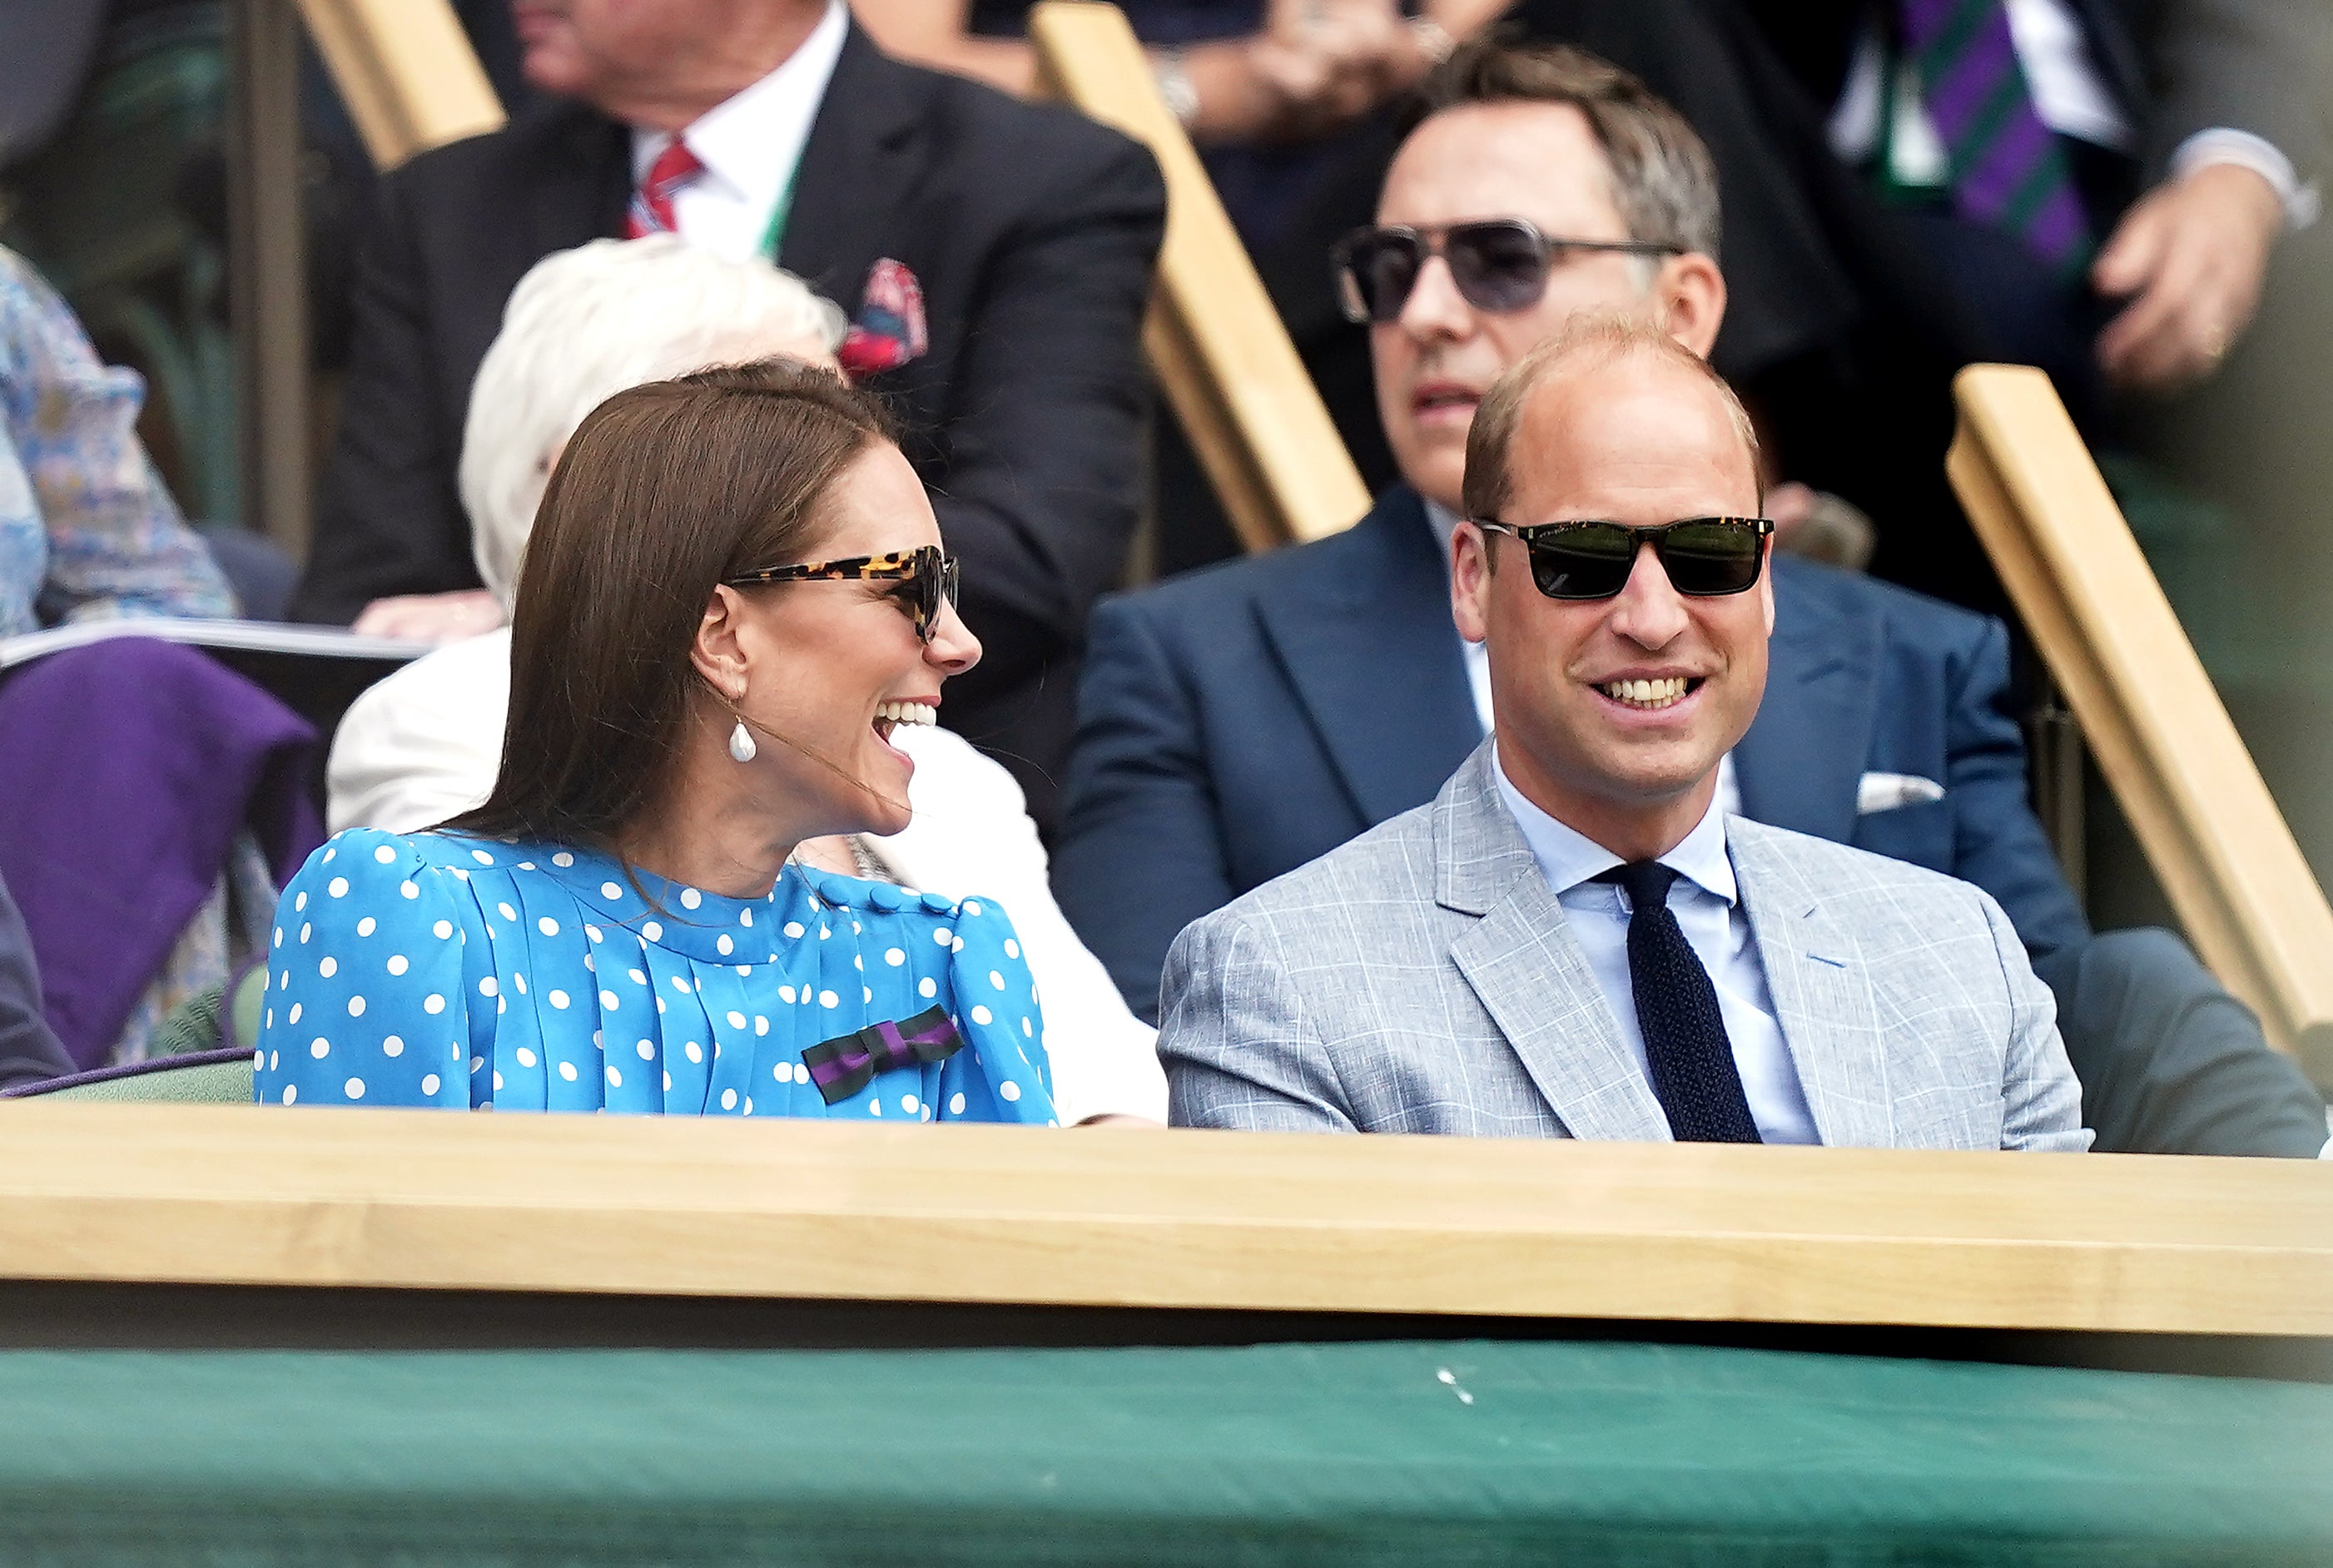 The Duchess and Duke of Cambridge in the royal box on day nine of the 2022 Wimbledon Championships at the All England Lawn Tennis and Croquet Club (Aaron Chown/PA)